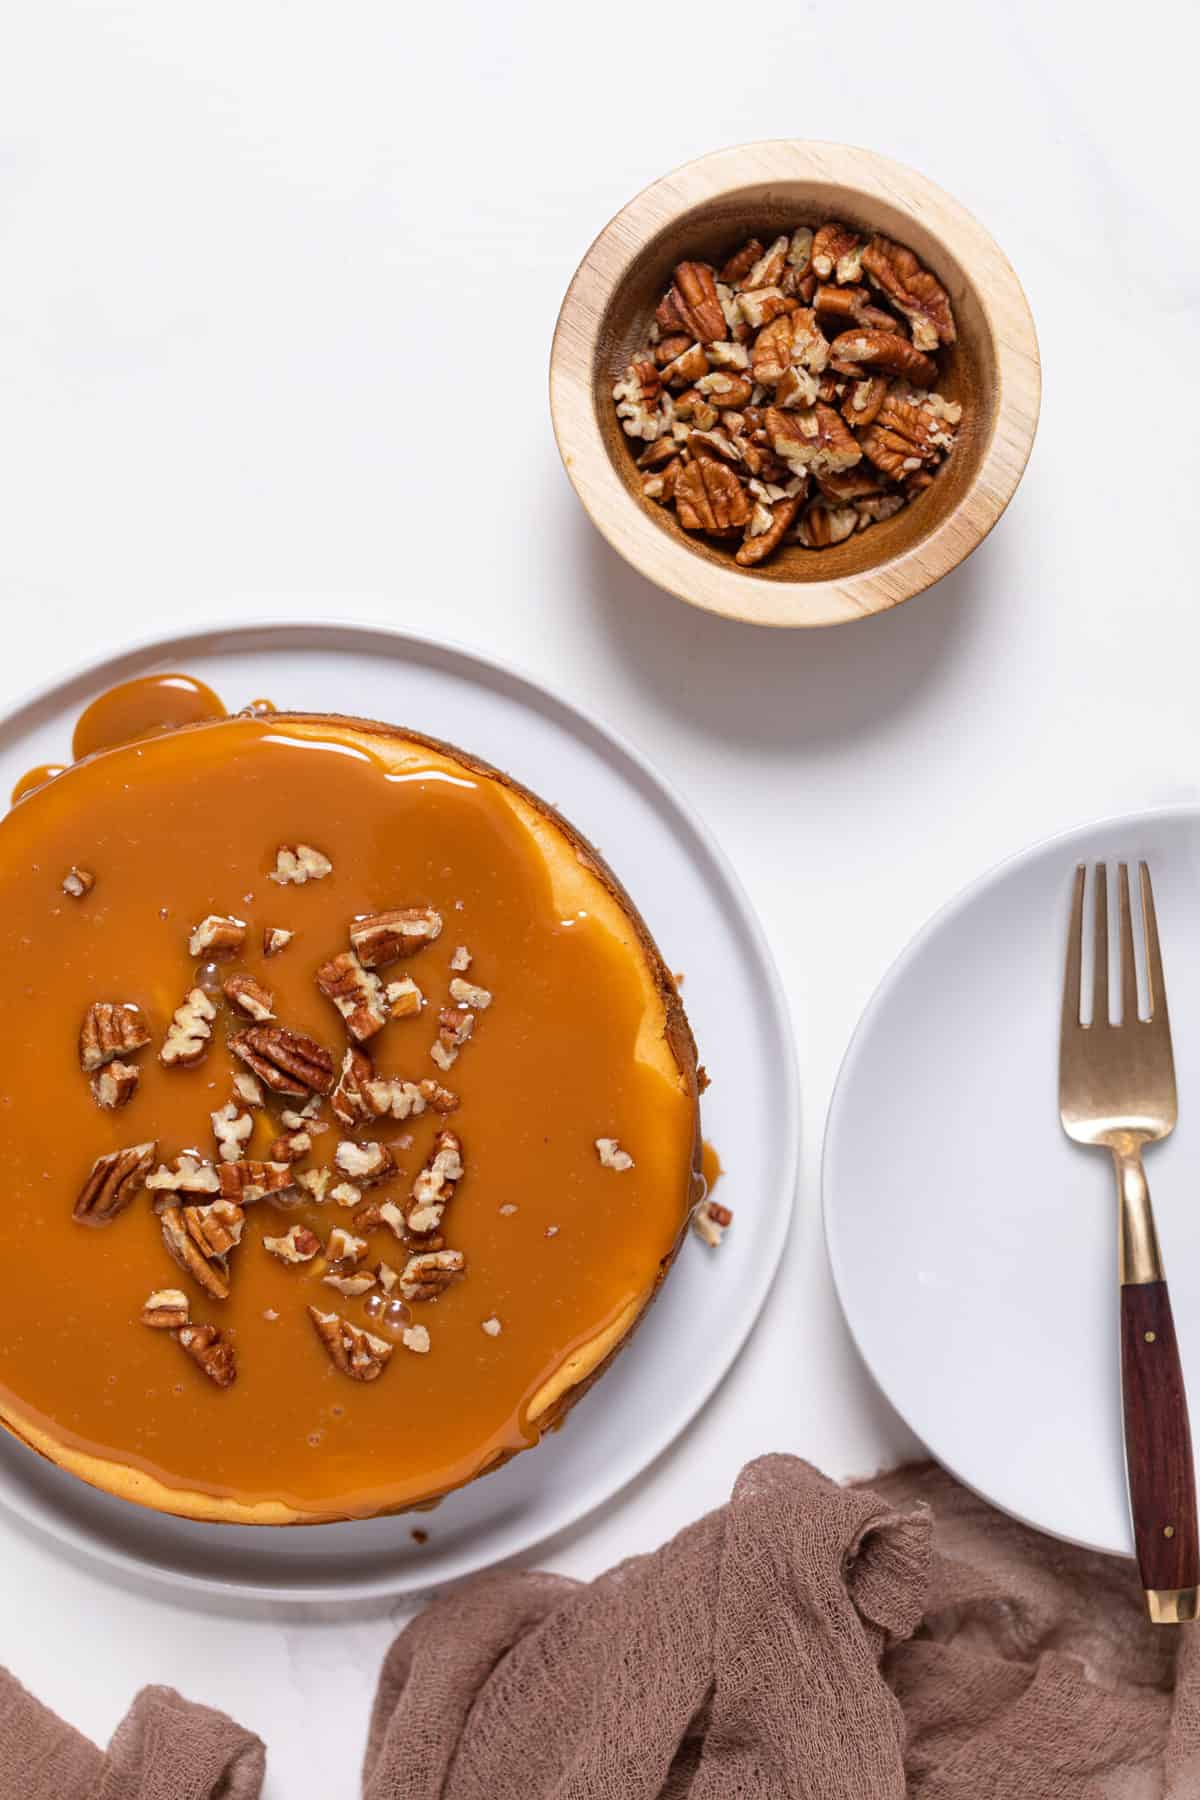 Sweet Potato Caramel Cheesecake next to a plate with a fork.